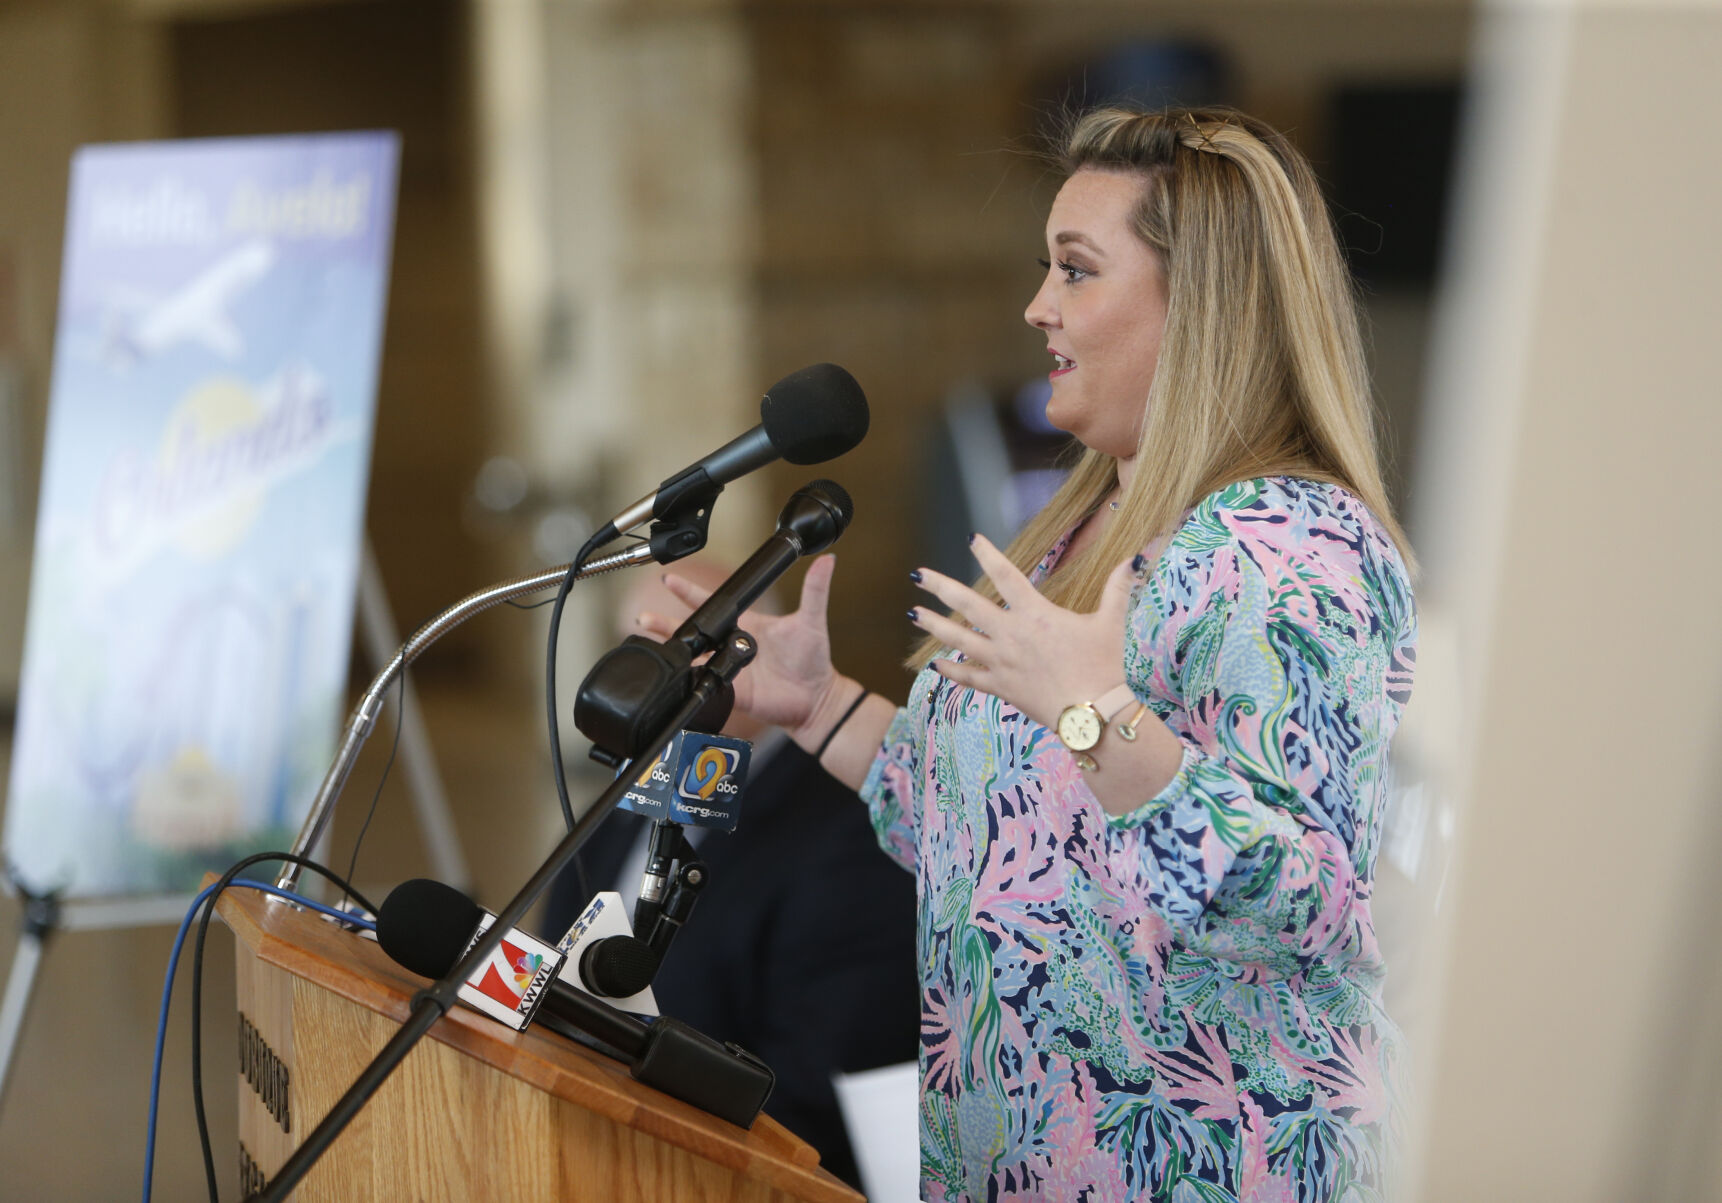 Avelo Airlines Communications Manager Courtney Goff speaks during a press conference announcing the low-cost airline as the new carrier from Dubuque Regional Airport on Thursday, Nov. 3, 2022.    PHOTO CREDIT: Dave Kettering